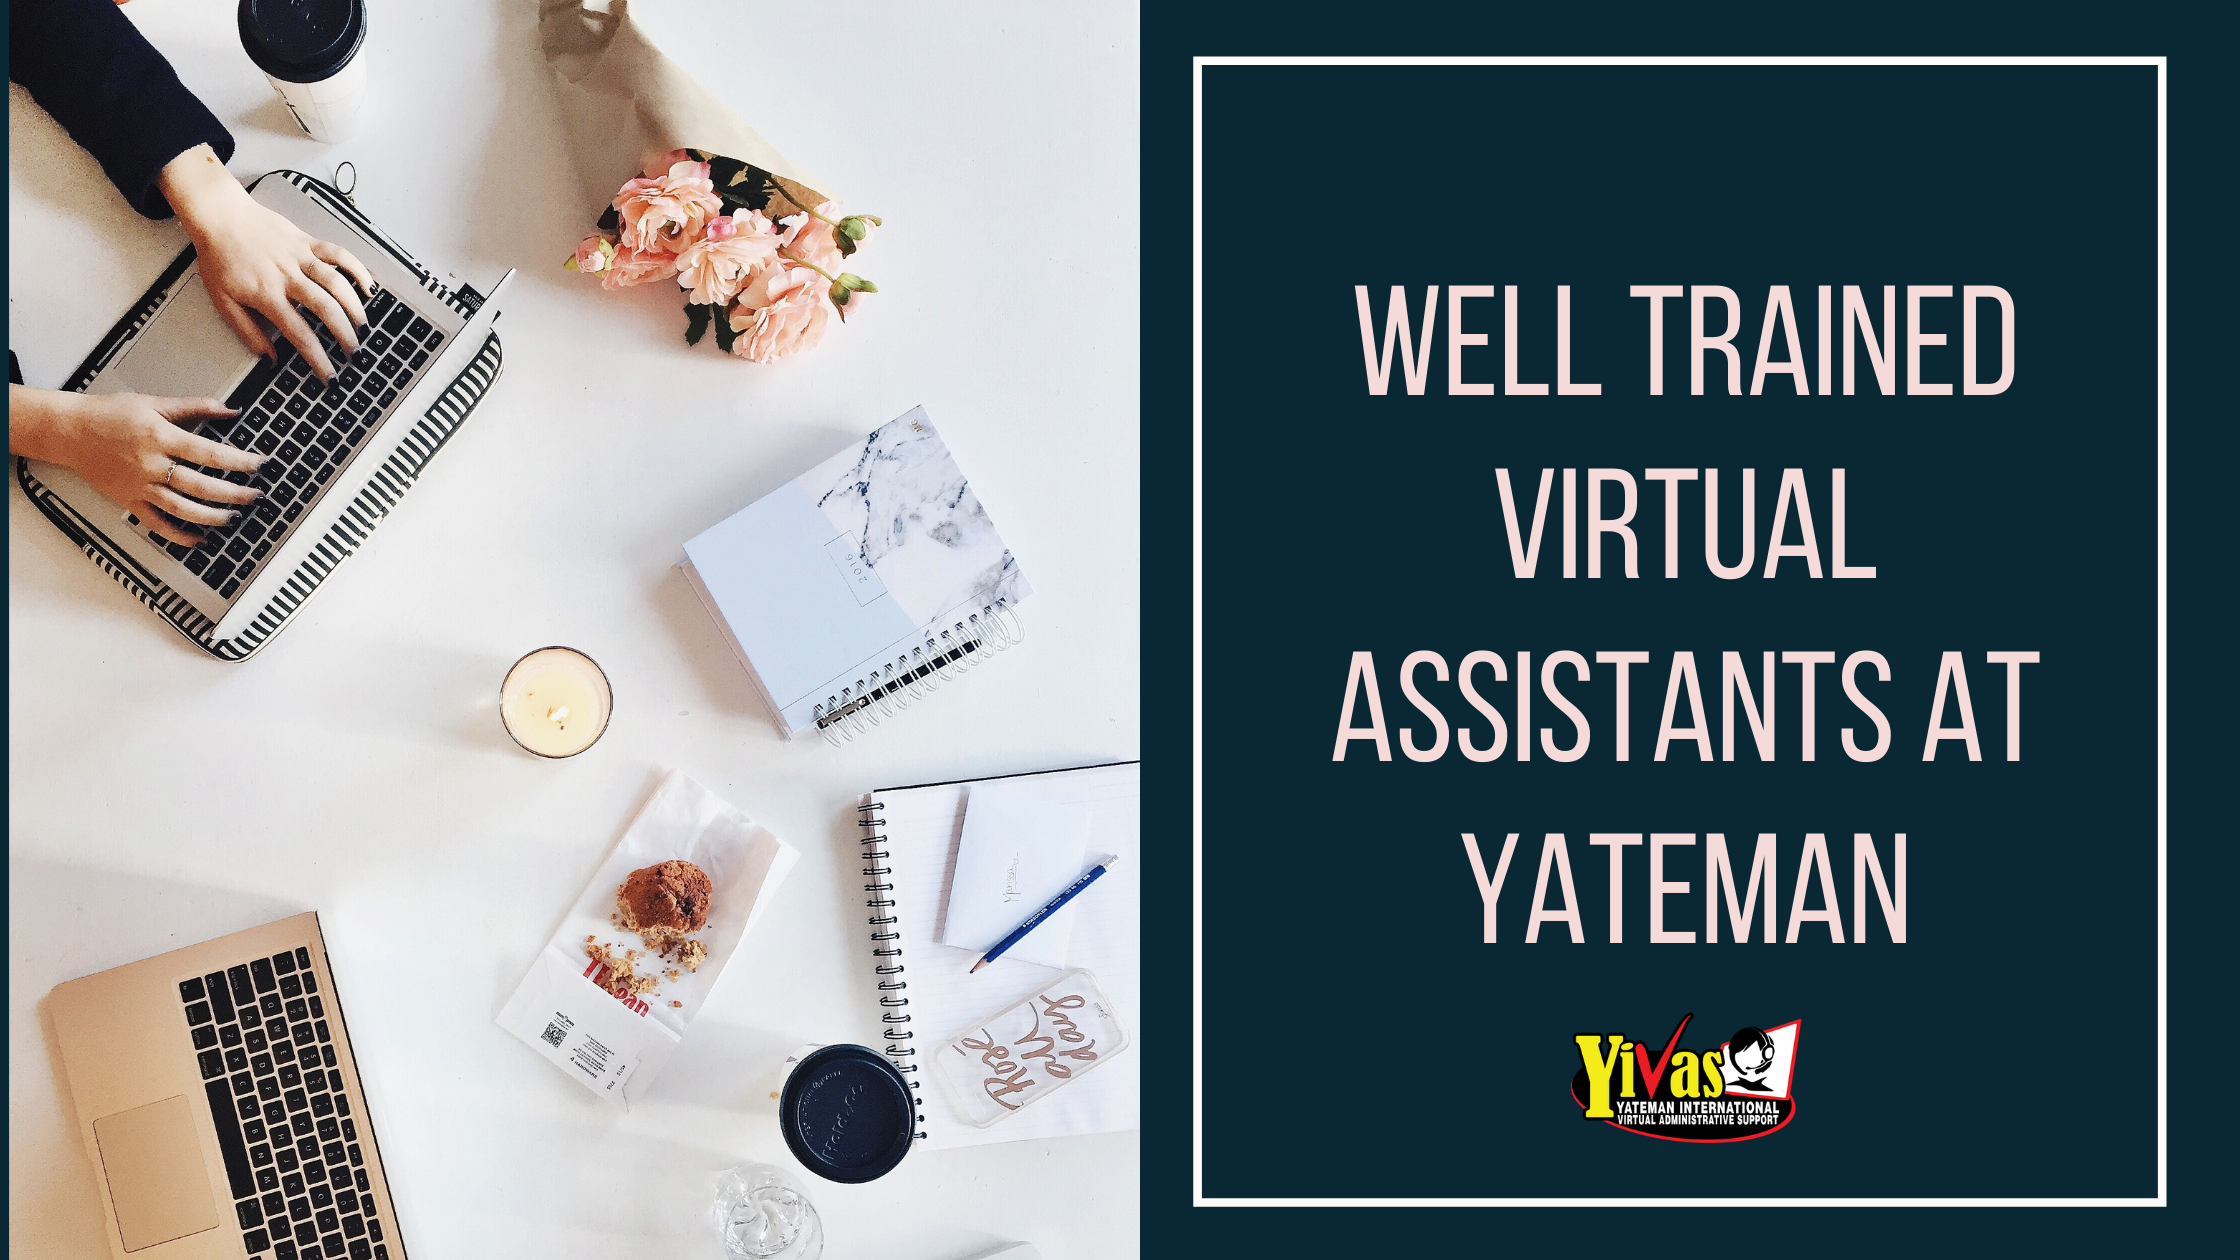 Well Trained Virtual Assistants at Yateman